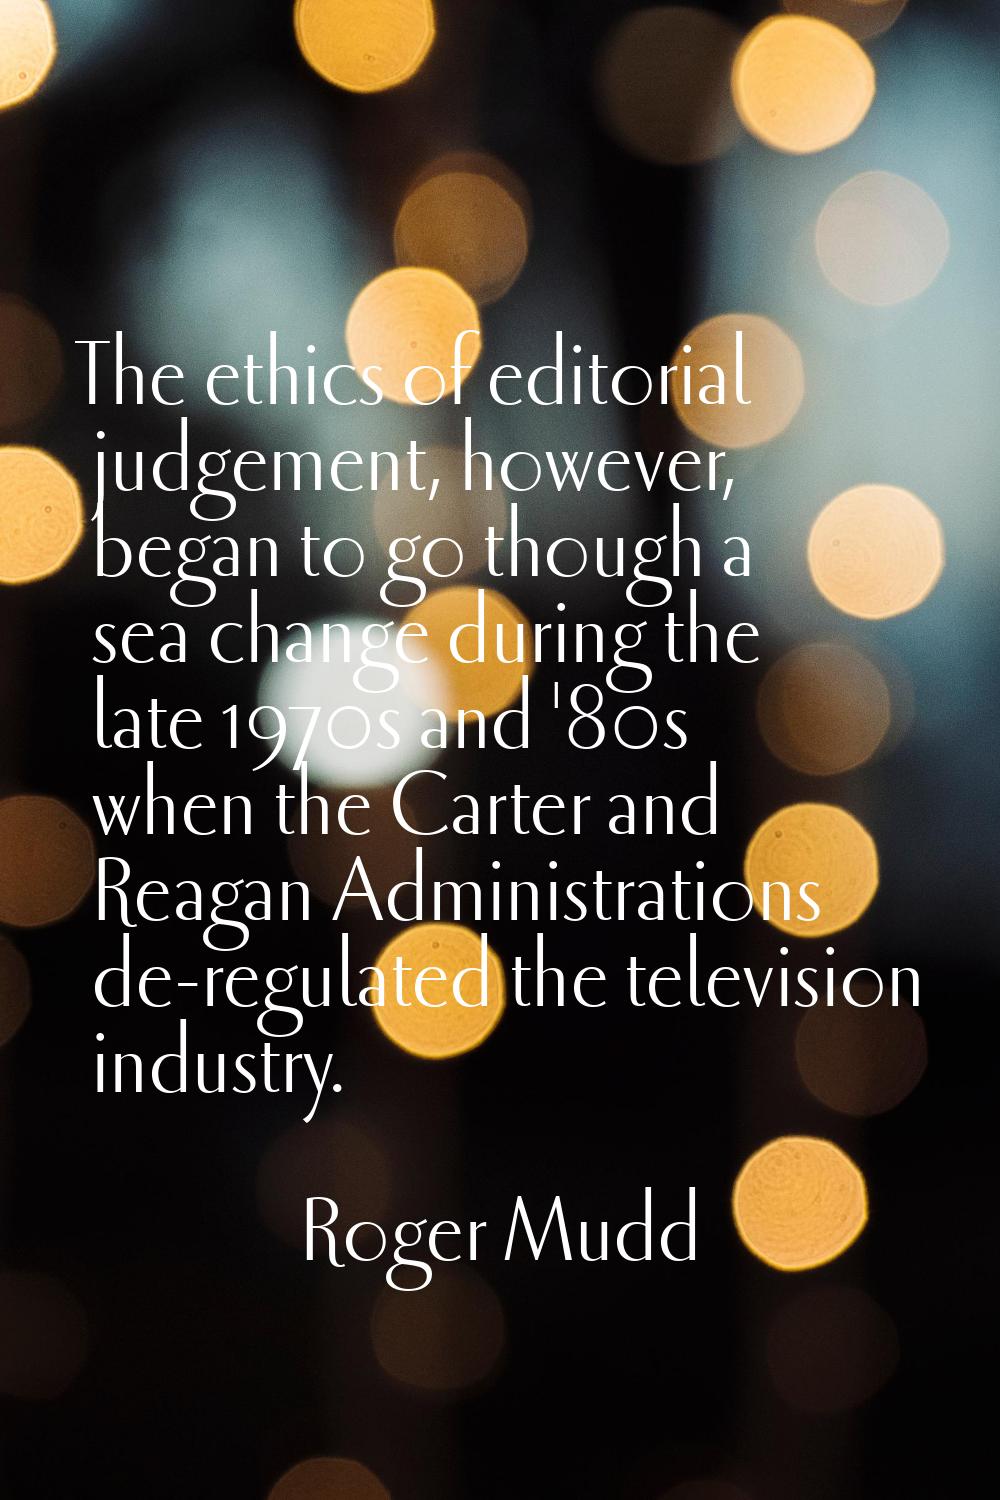 The ethics of editorial judgement, however, began to go though a sea change during the late 1970s a